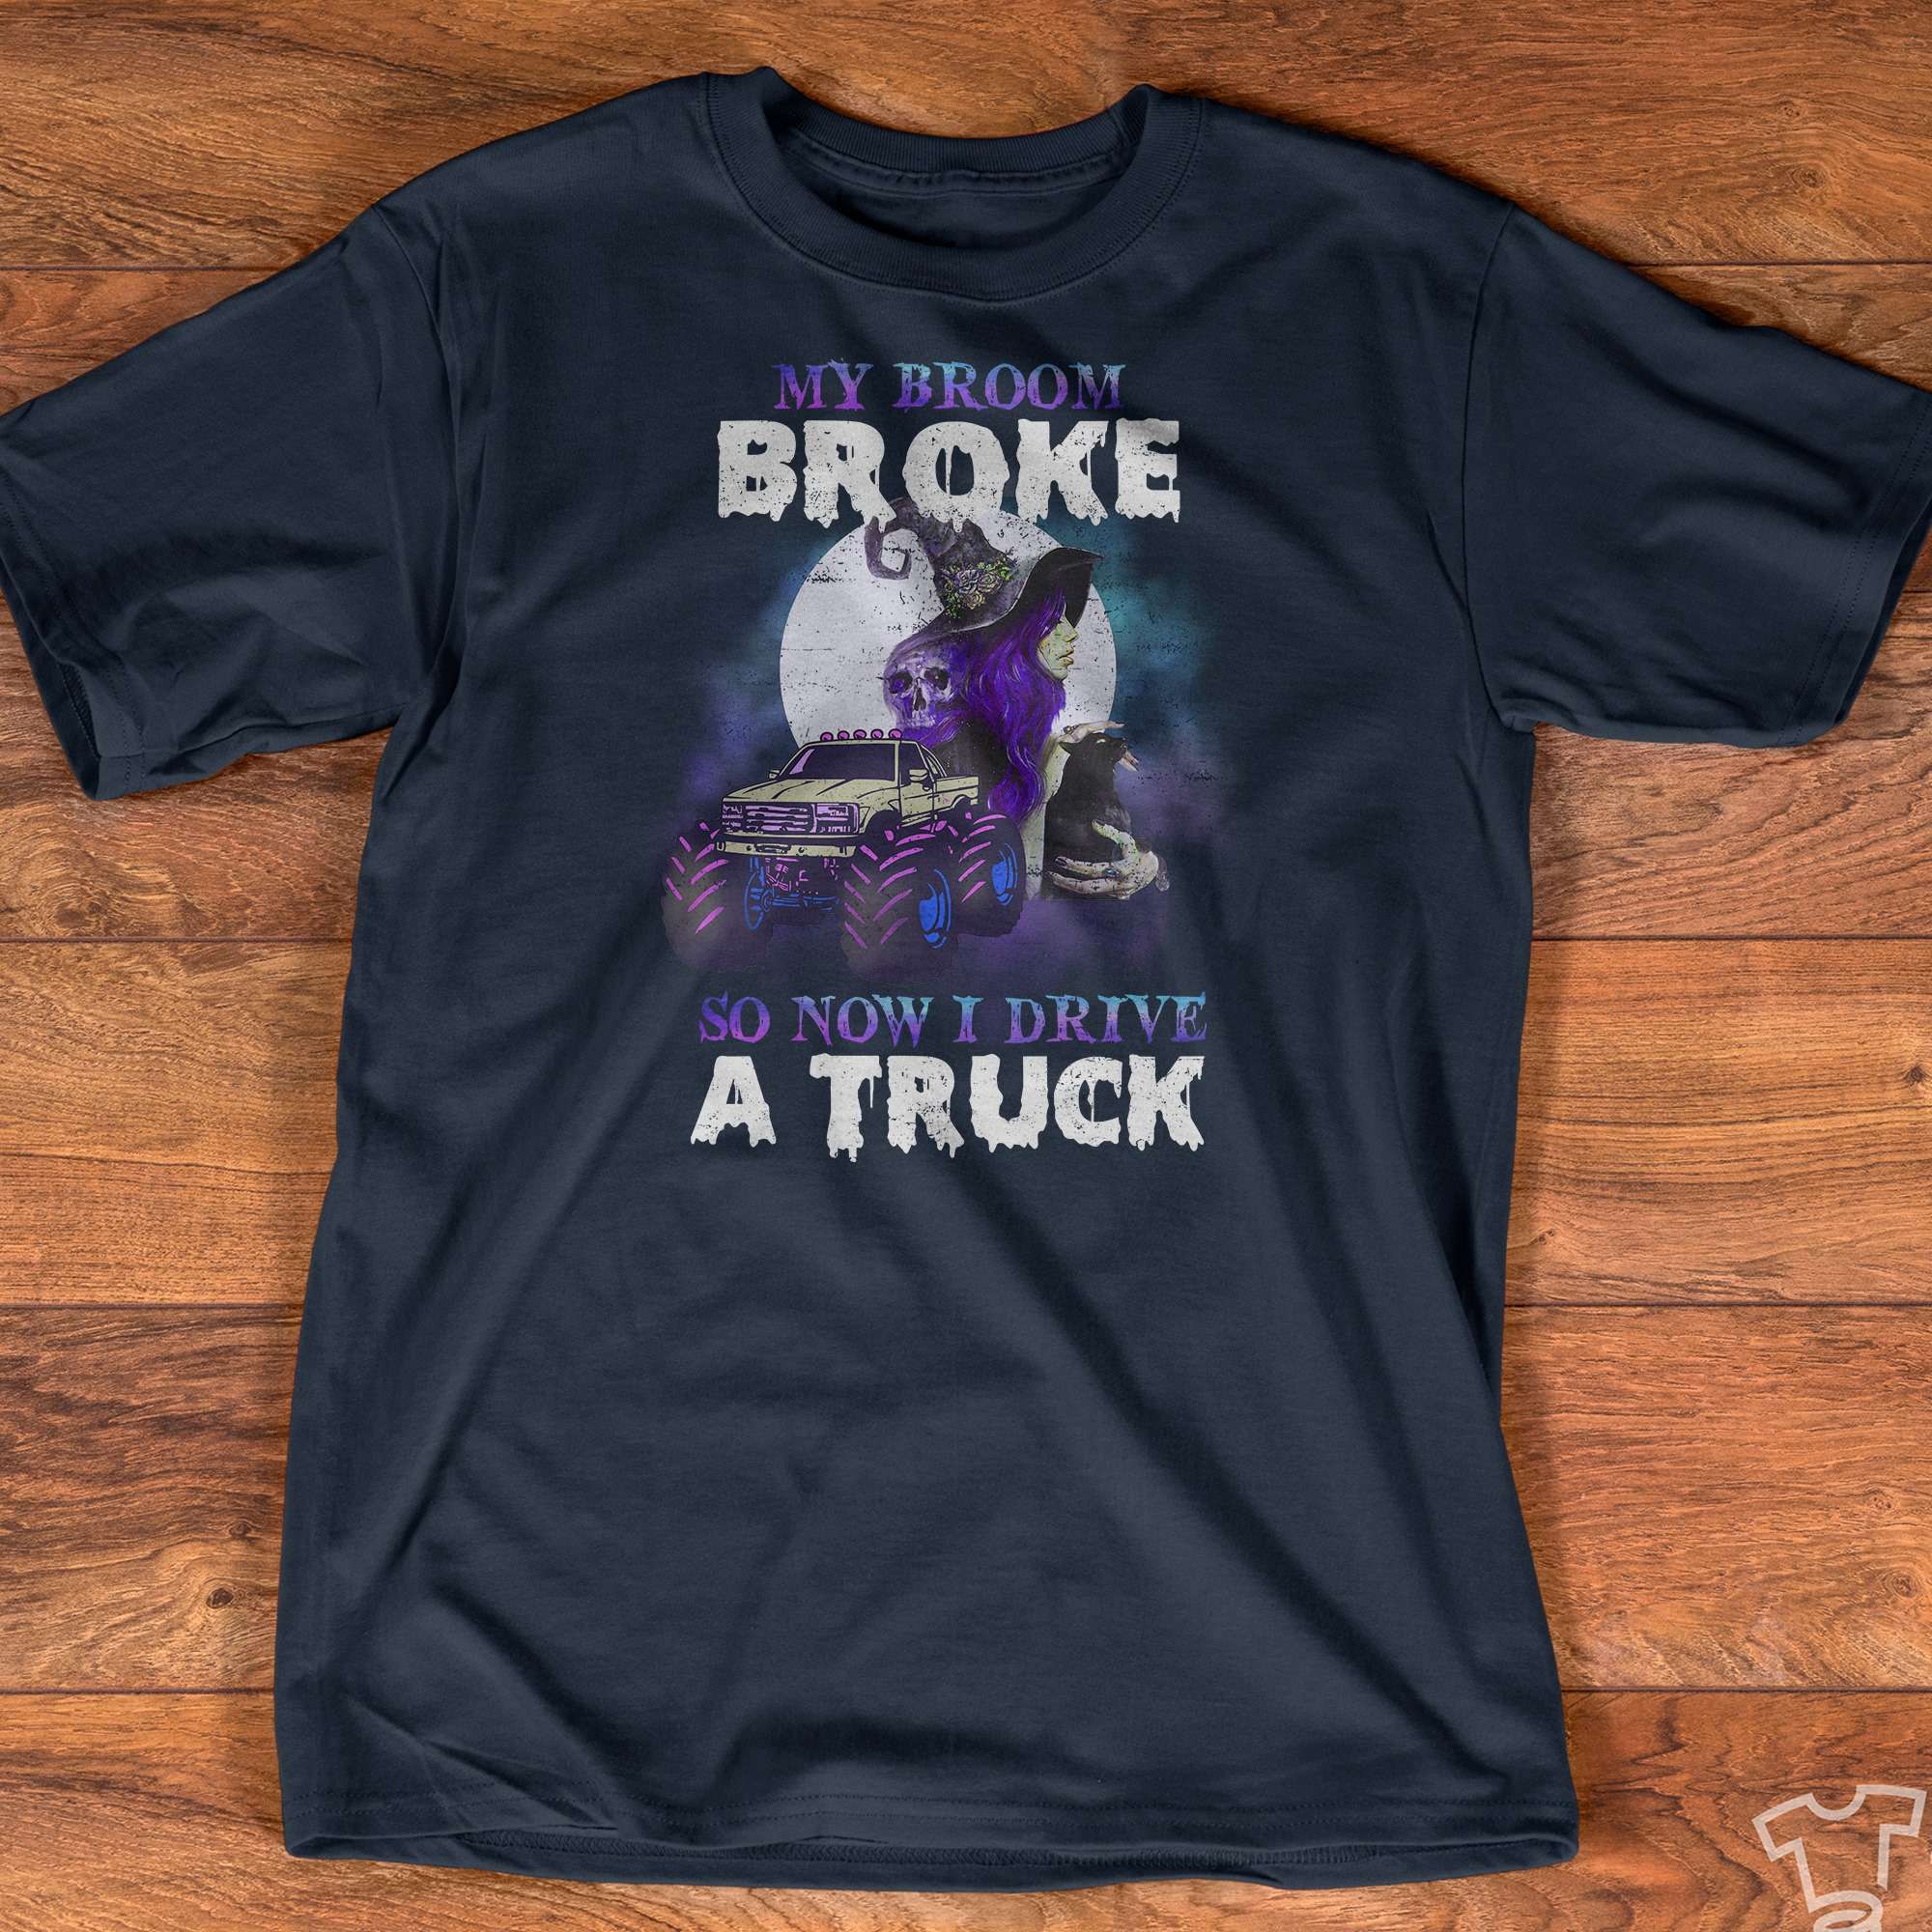 My broom broke so now I drive a truck - Halloween witch costume, truck driver